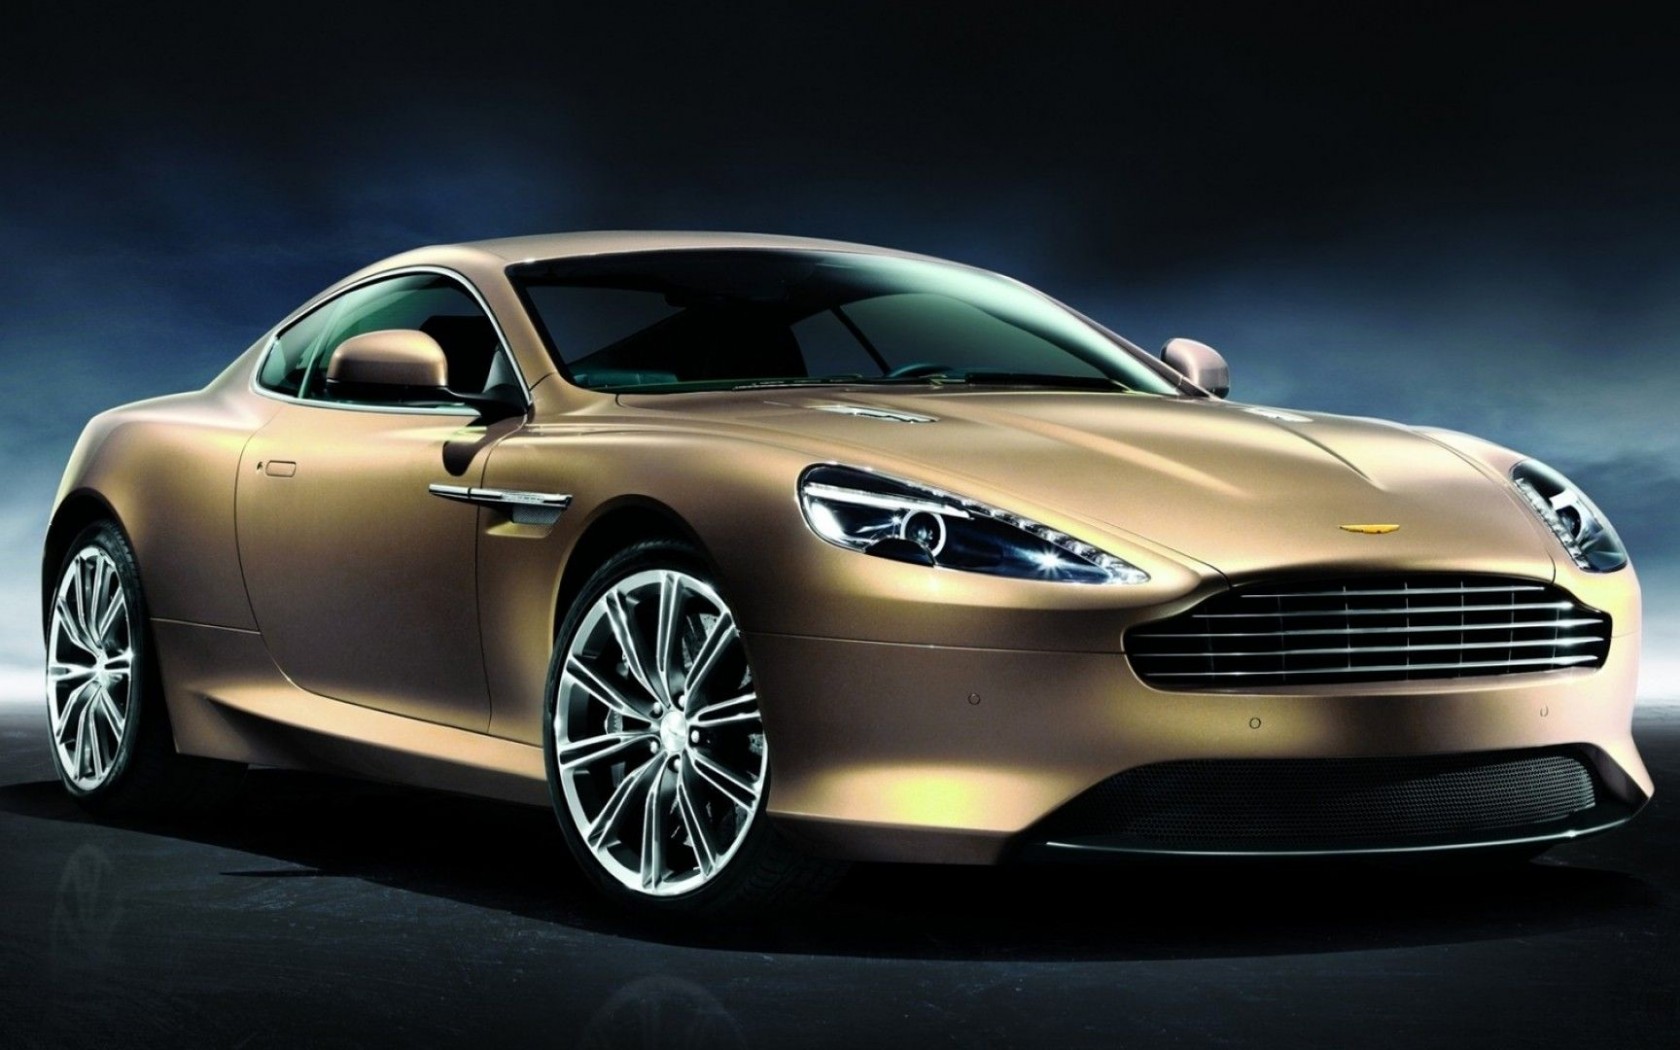 Aston Martin Dbs Wallpaper Vehicle Pictures